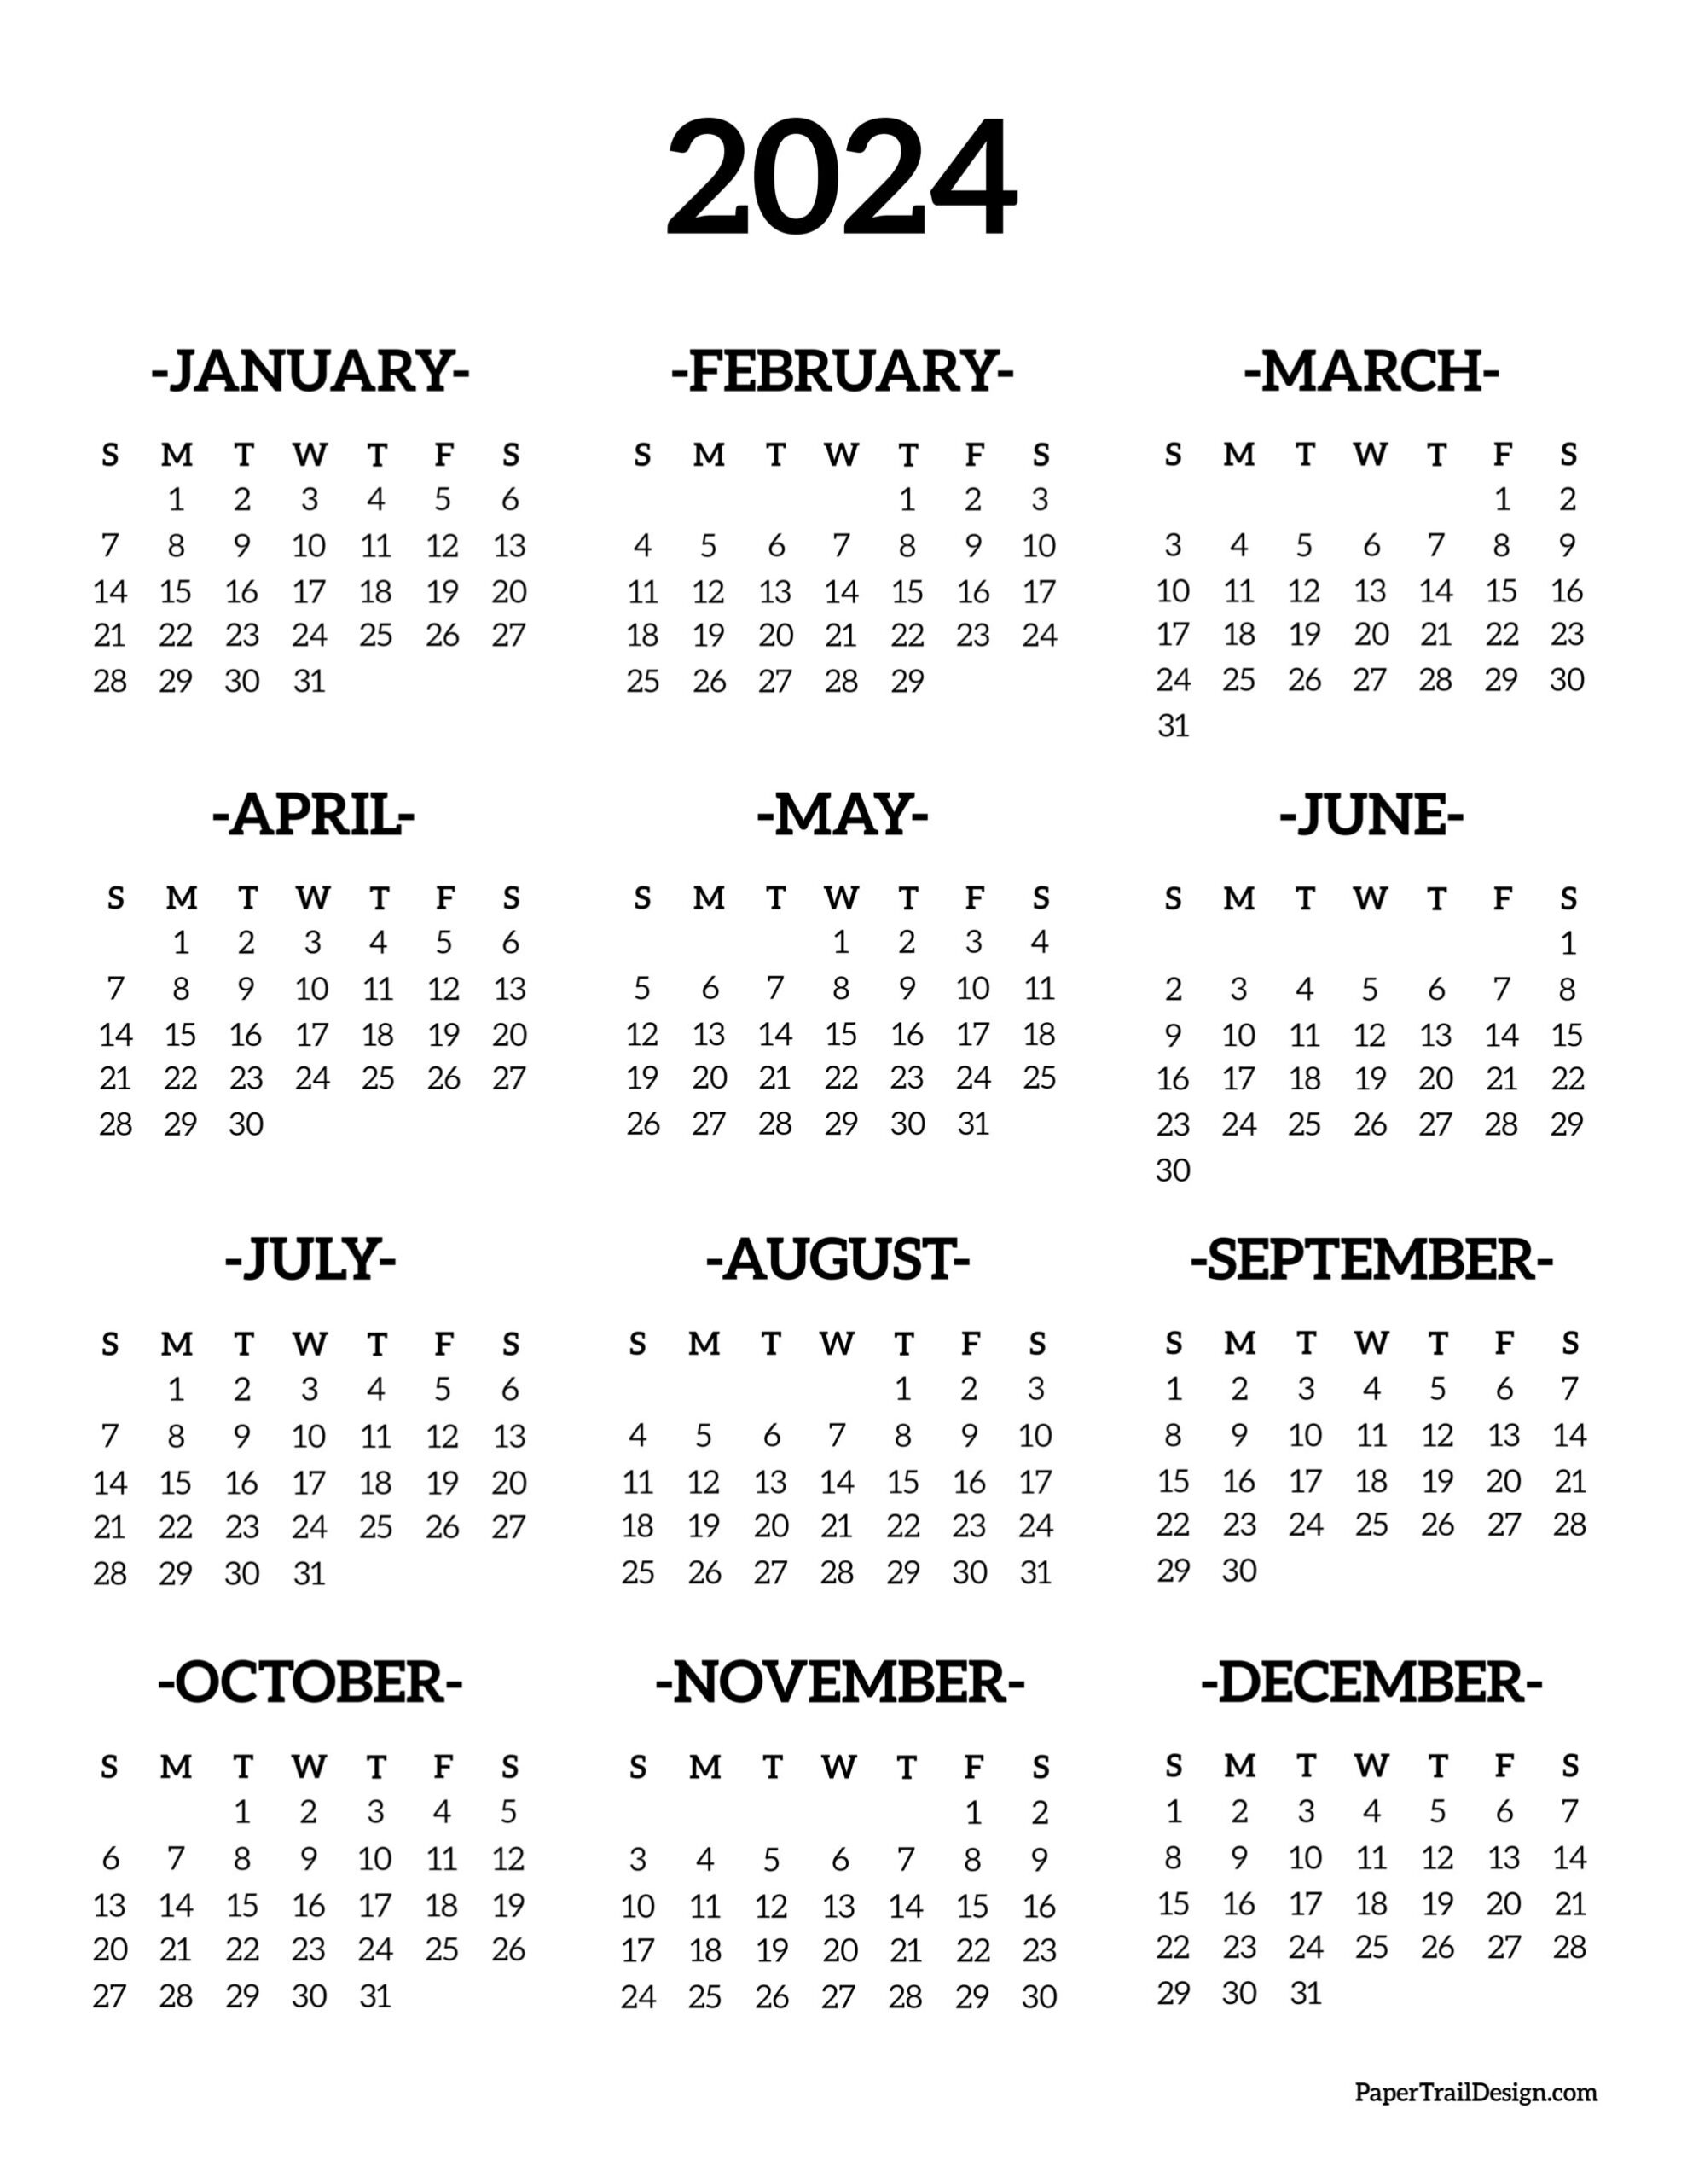 Calendar 2024 Printable One Page - Paper Trail Design | 2024 Year Calendar One Page Printable